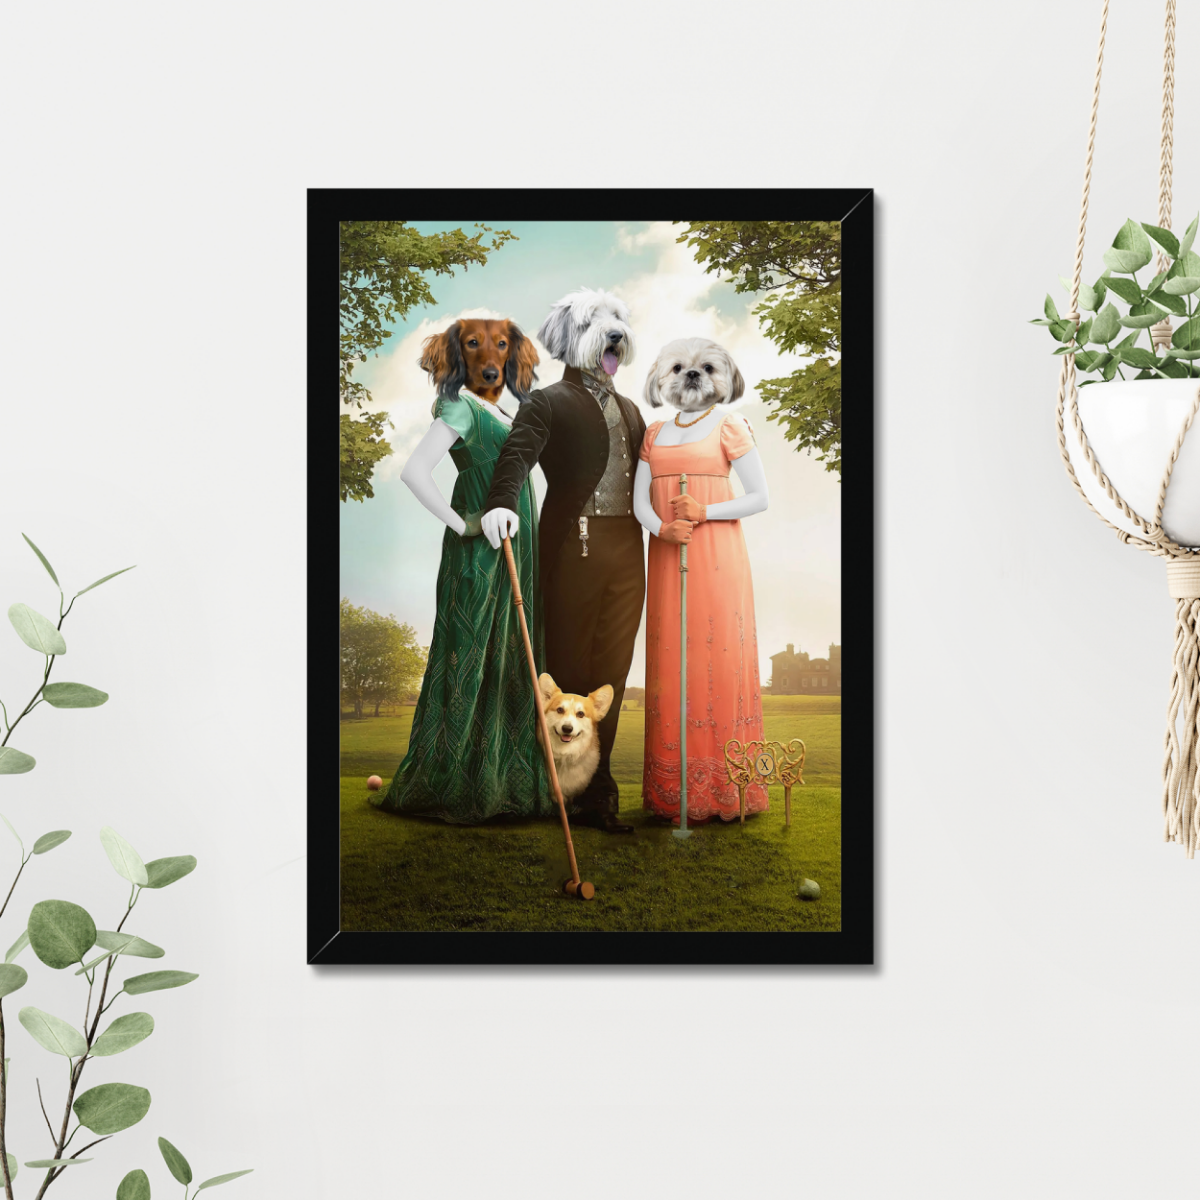 The Trio (Bridgerton Inspired): Custom Pet Portrait, Paw & Glory, paw and glory, portraits of dogs, portraits dogs, dog paintings, professional dog portraits, Crownandpaw, mozart pet portraits sale, dog portrait,